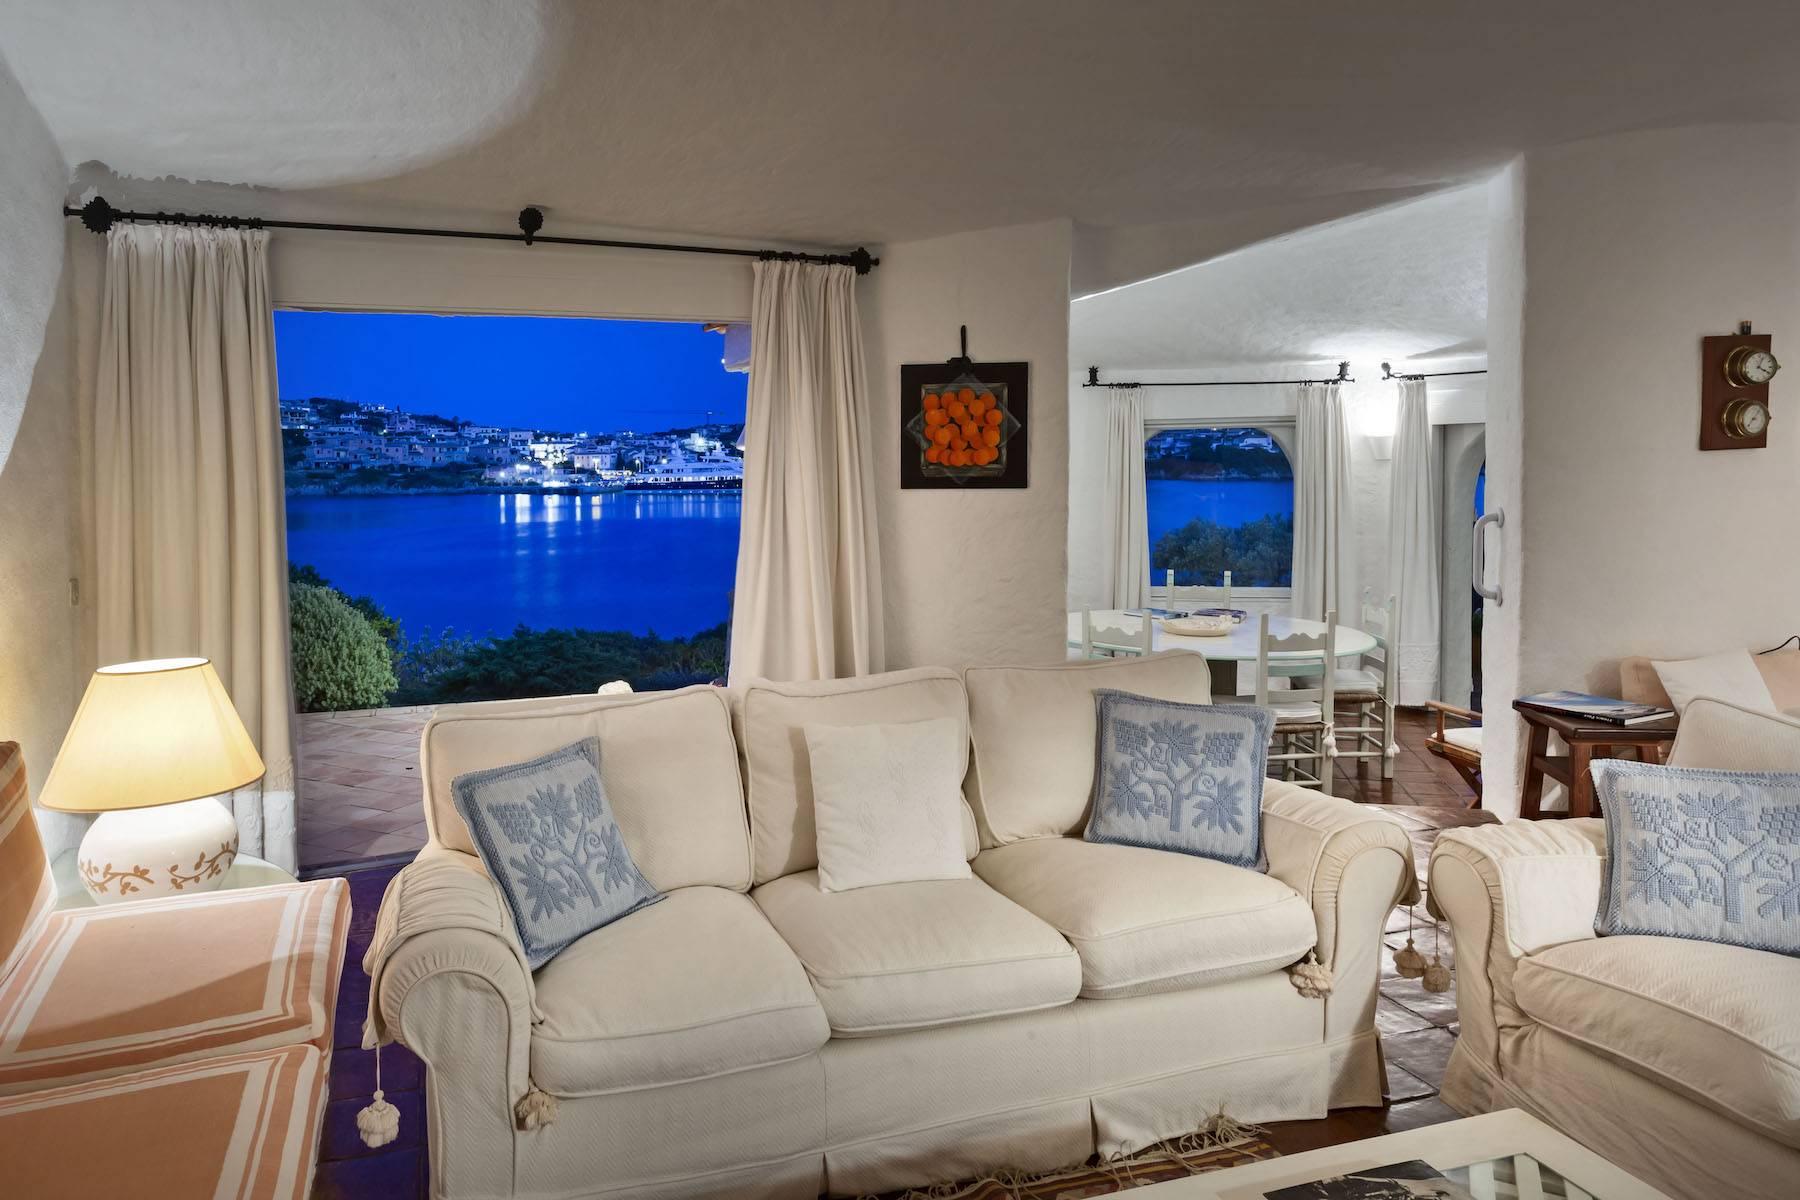 A waterfront haven.
Your Private Window Between Sea And Sky - 40